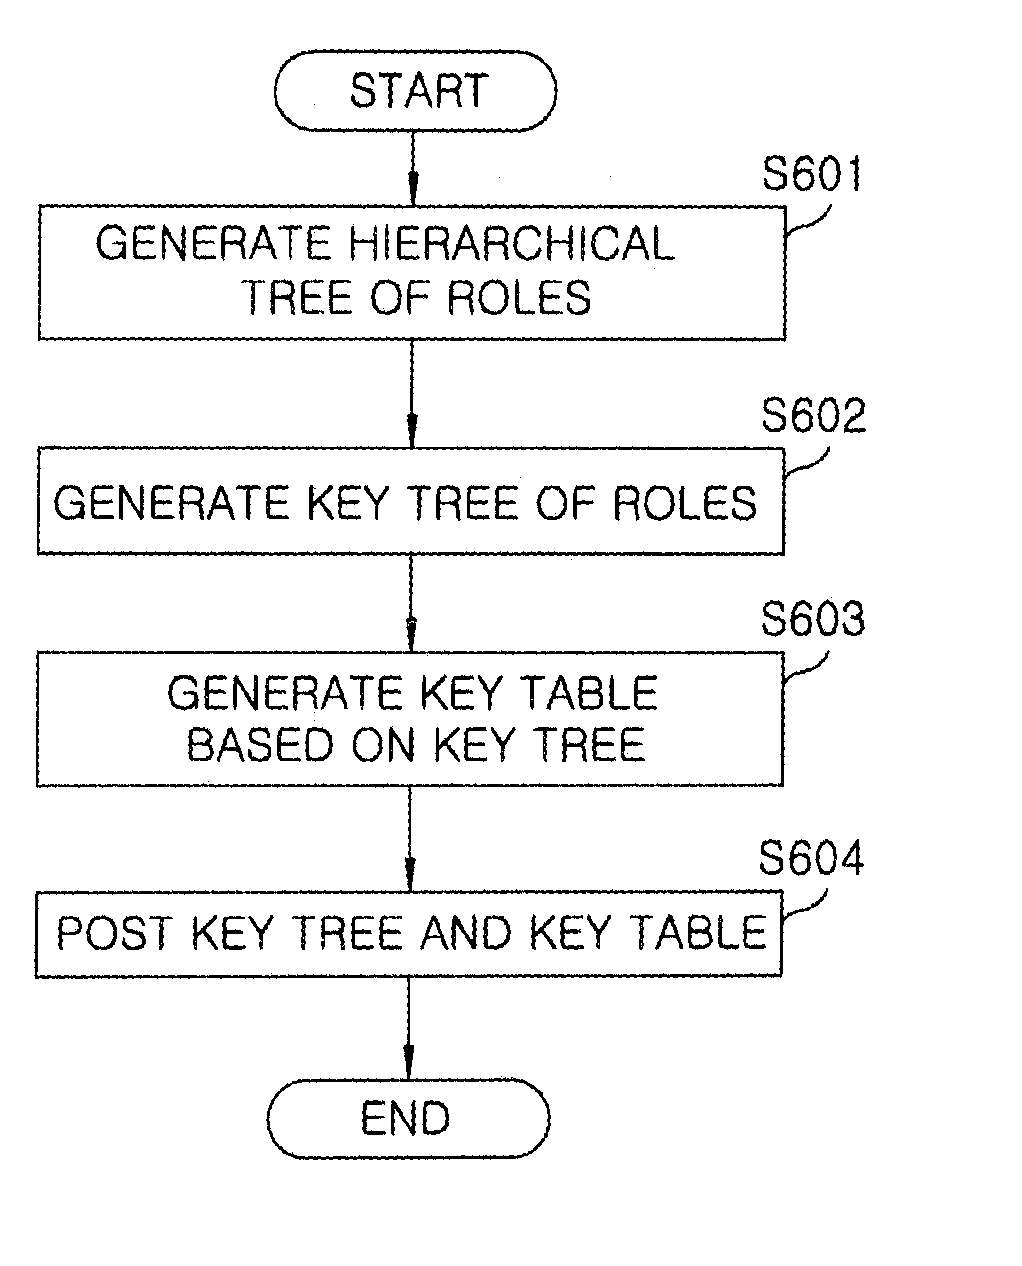 Key tree construction and key distribution method for hierarchical role-based access control